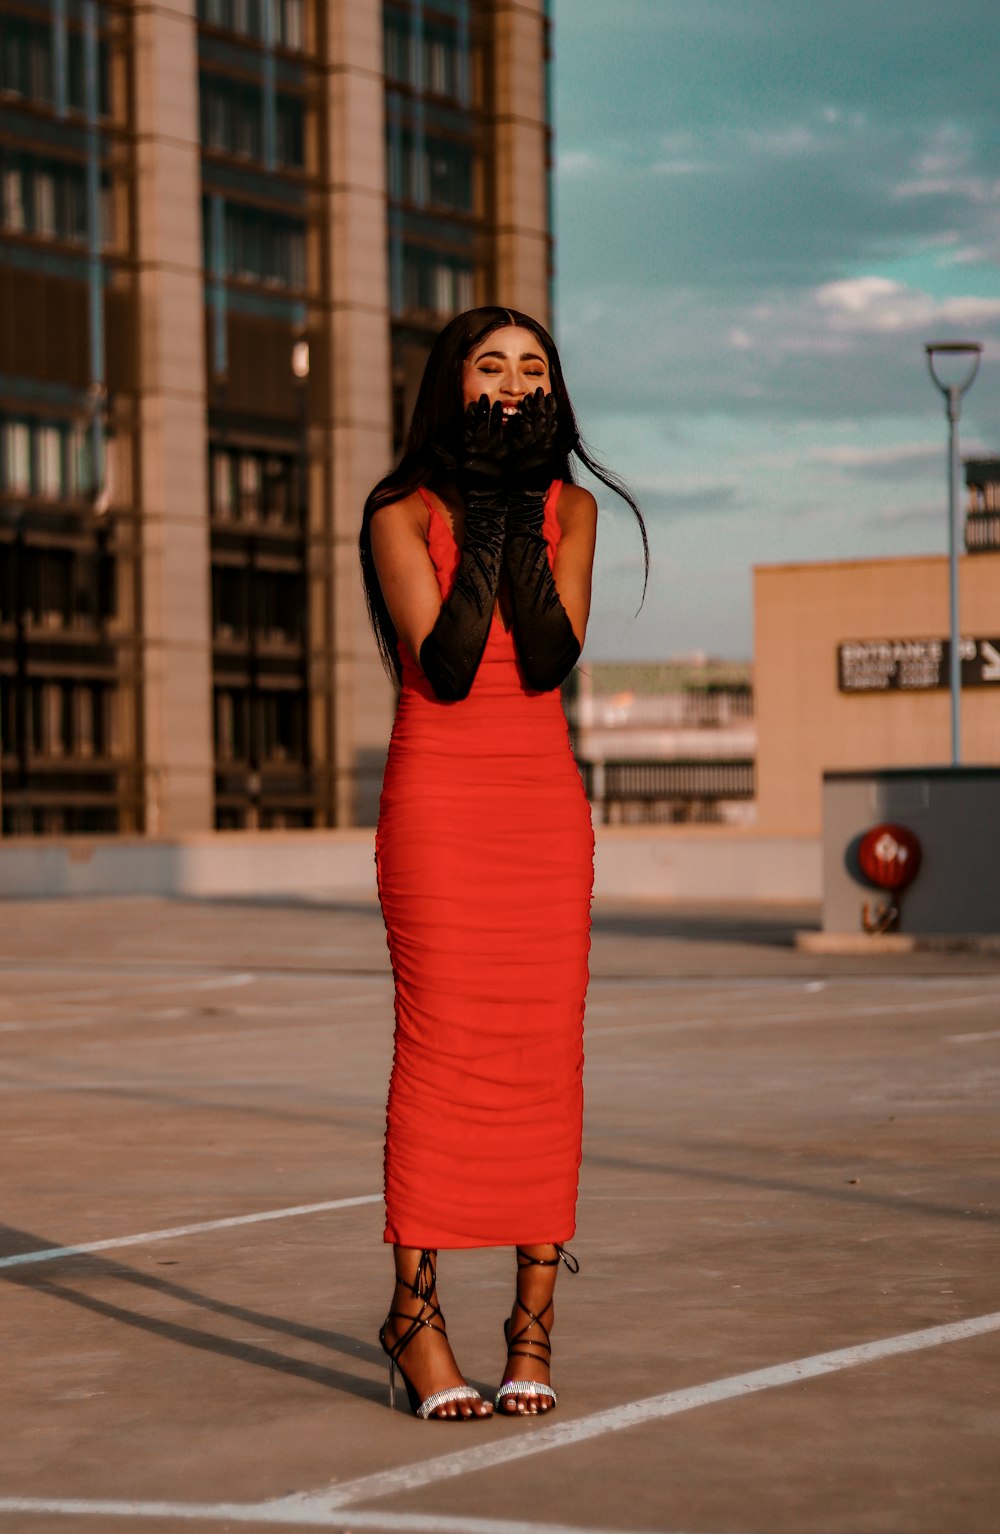 a woman in a red dress standing in a parking lot